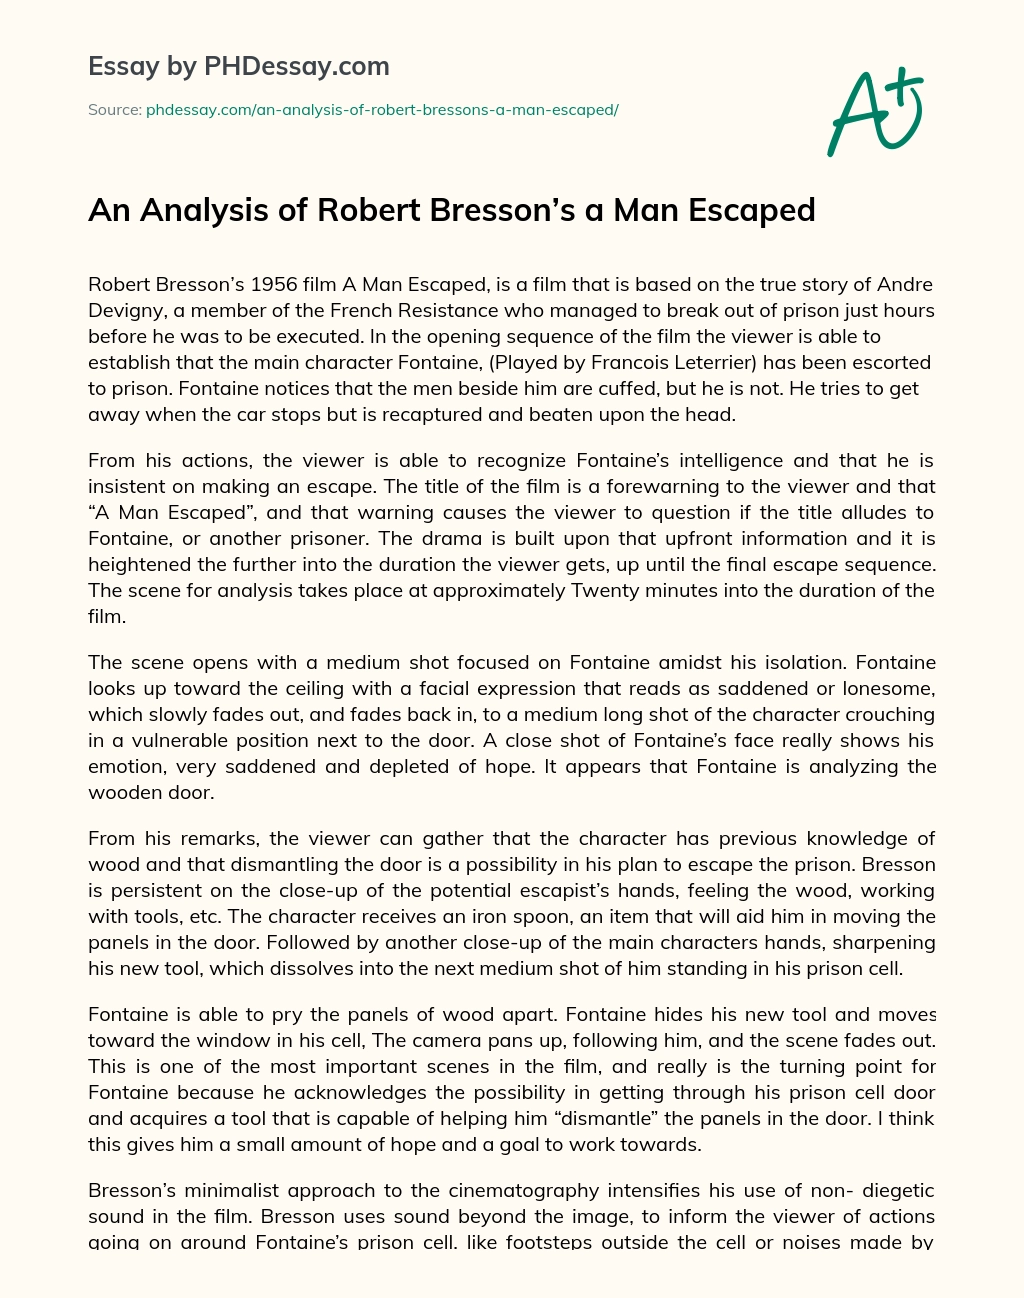 An Analysis of Robert Bresson’s a Man Escaped essay